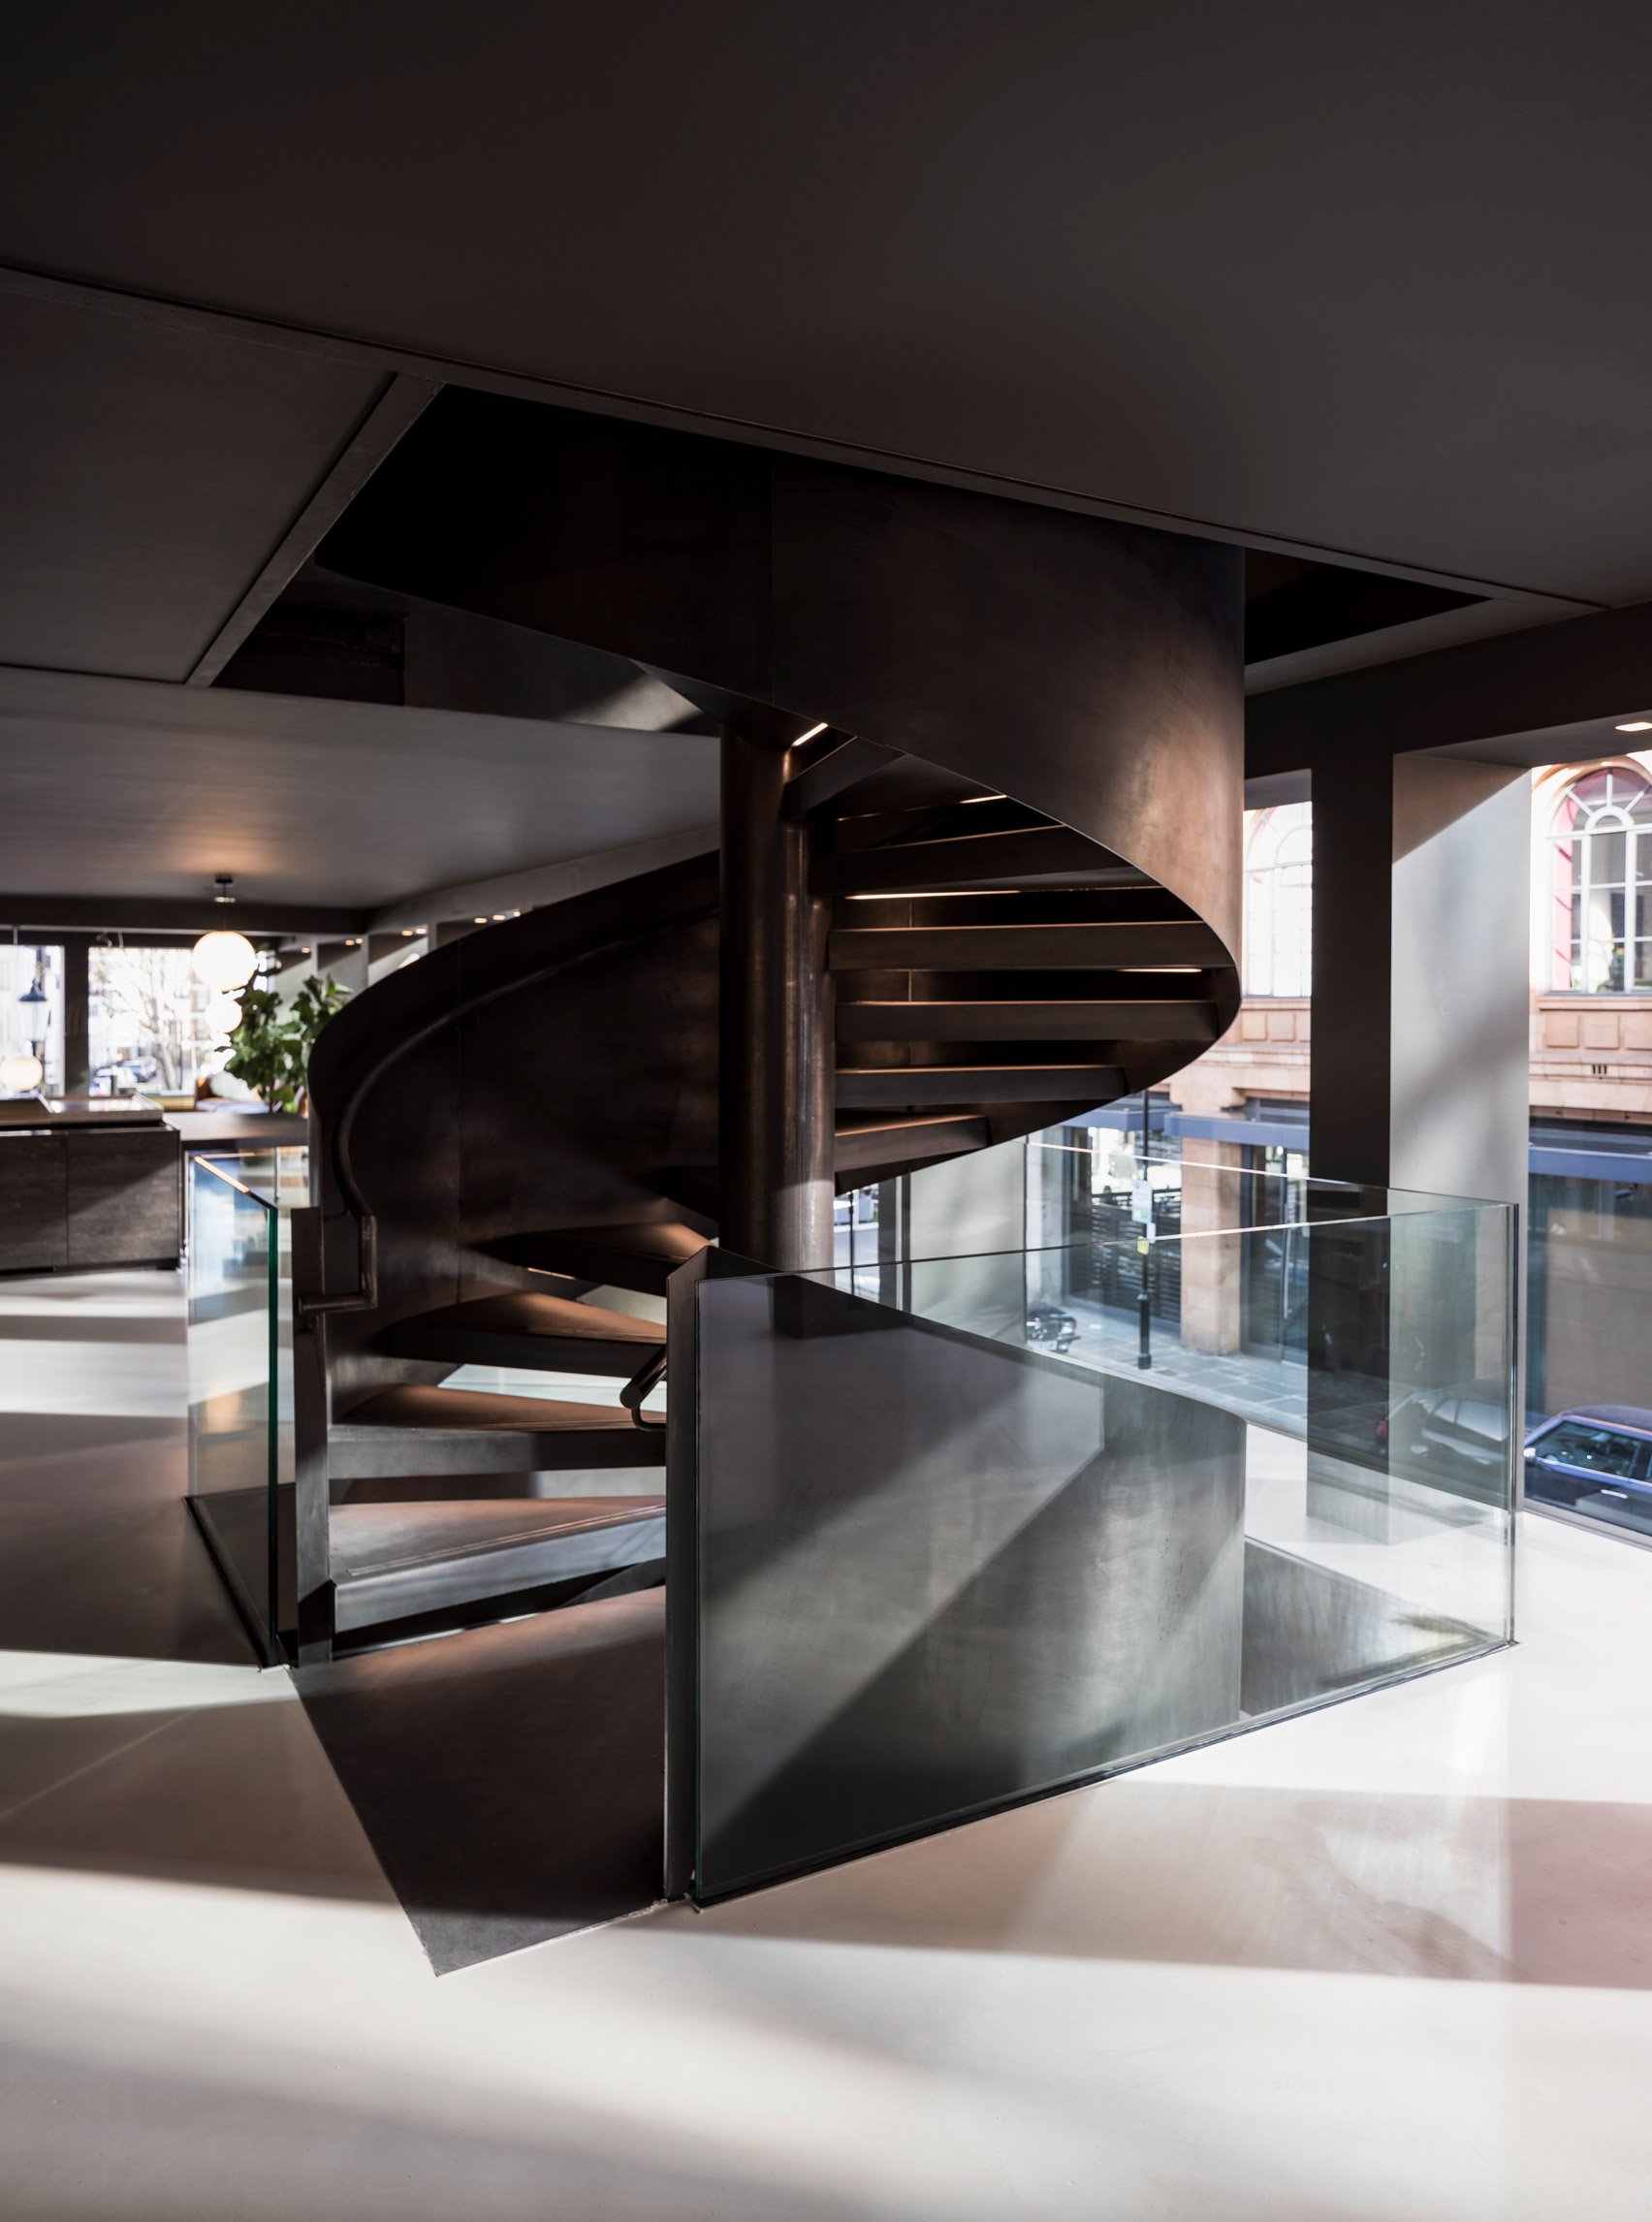 Helical spiral staircase clad in metal in a London furniture showroom